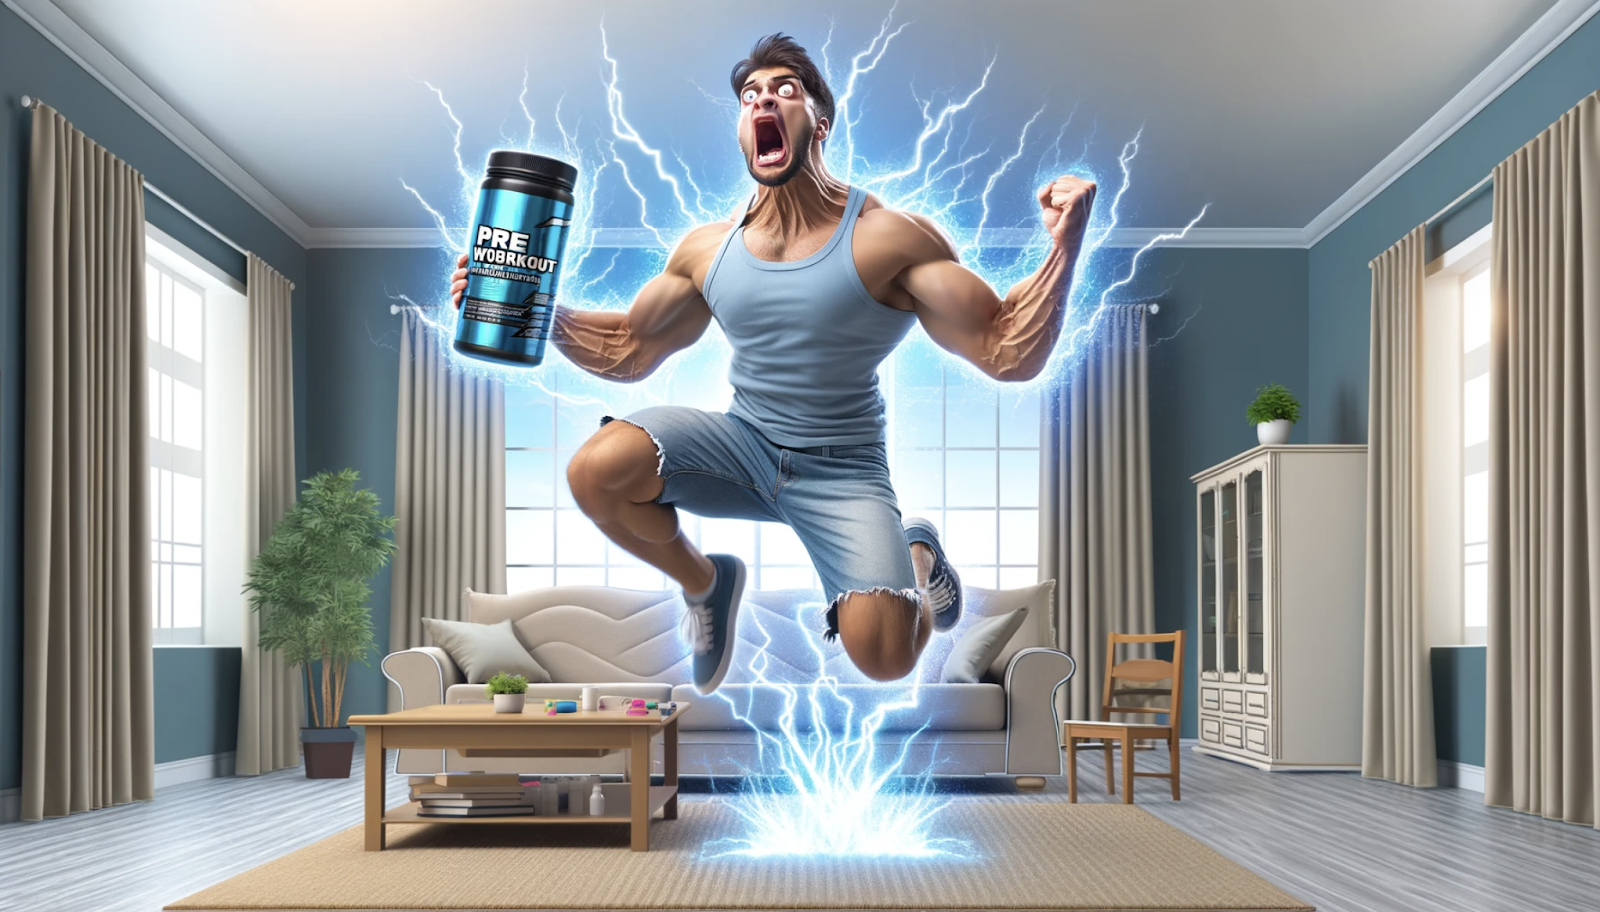 AI generated image of a man with a lot of energy after drinking preworkout